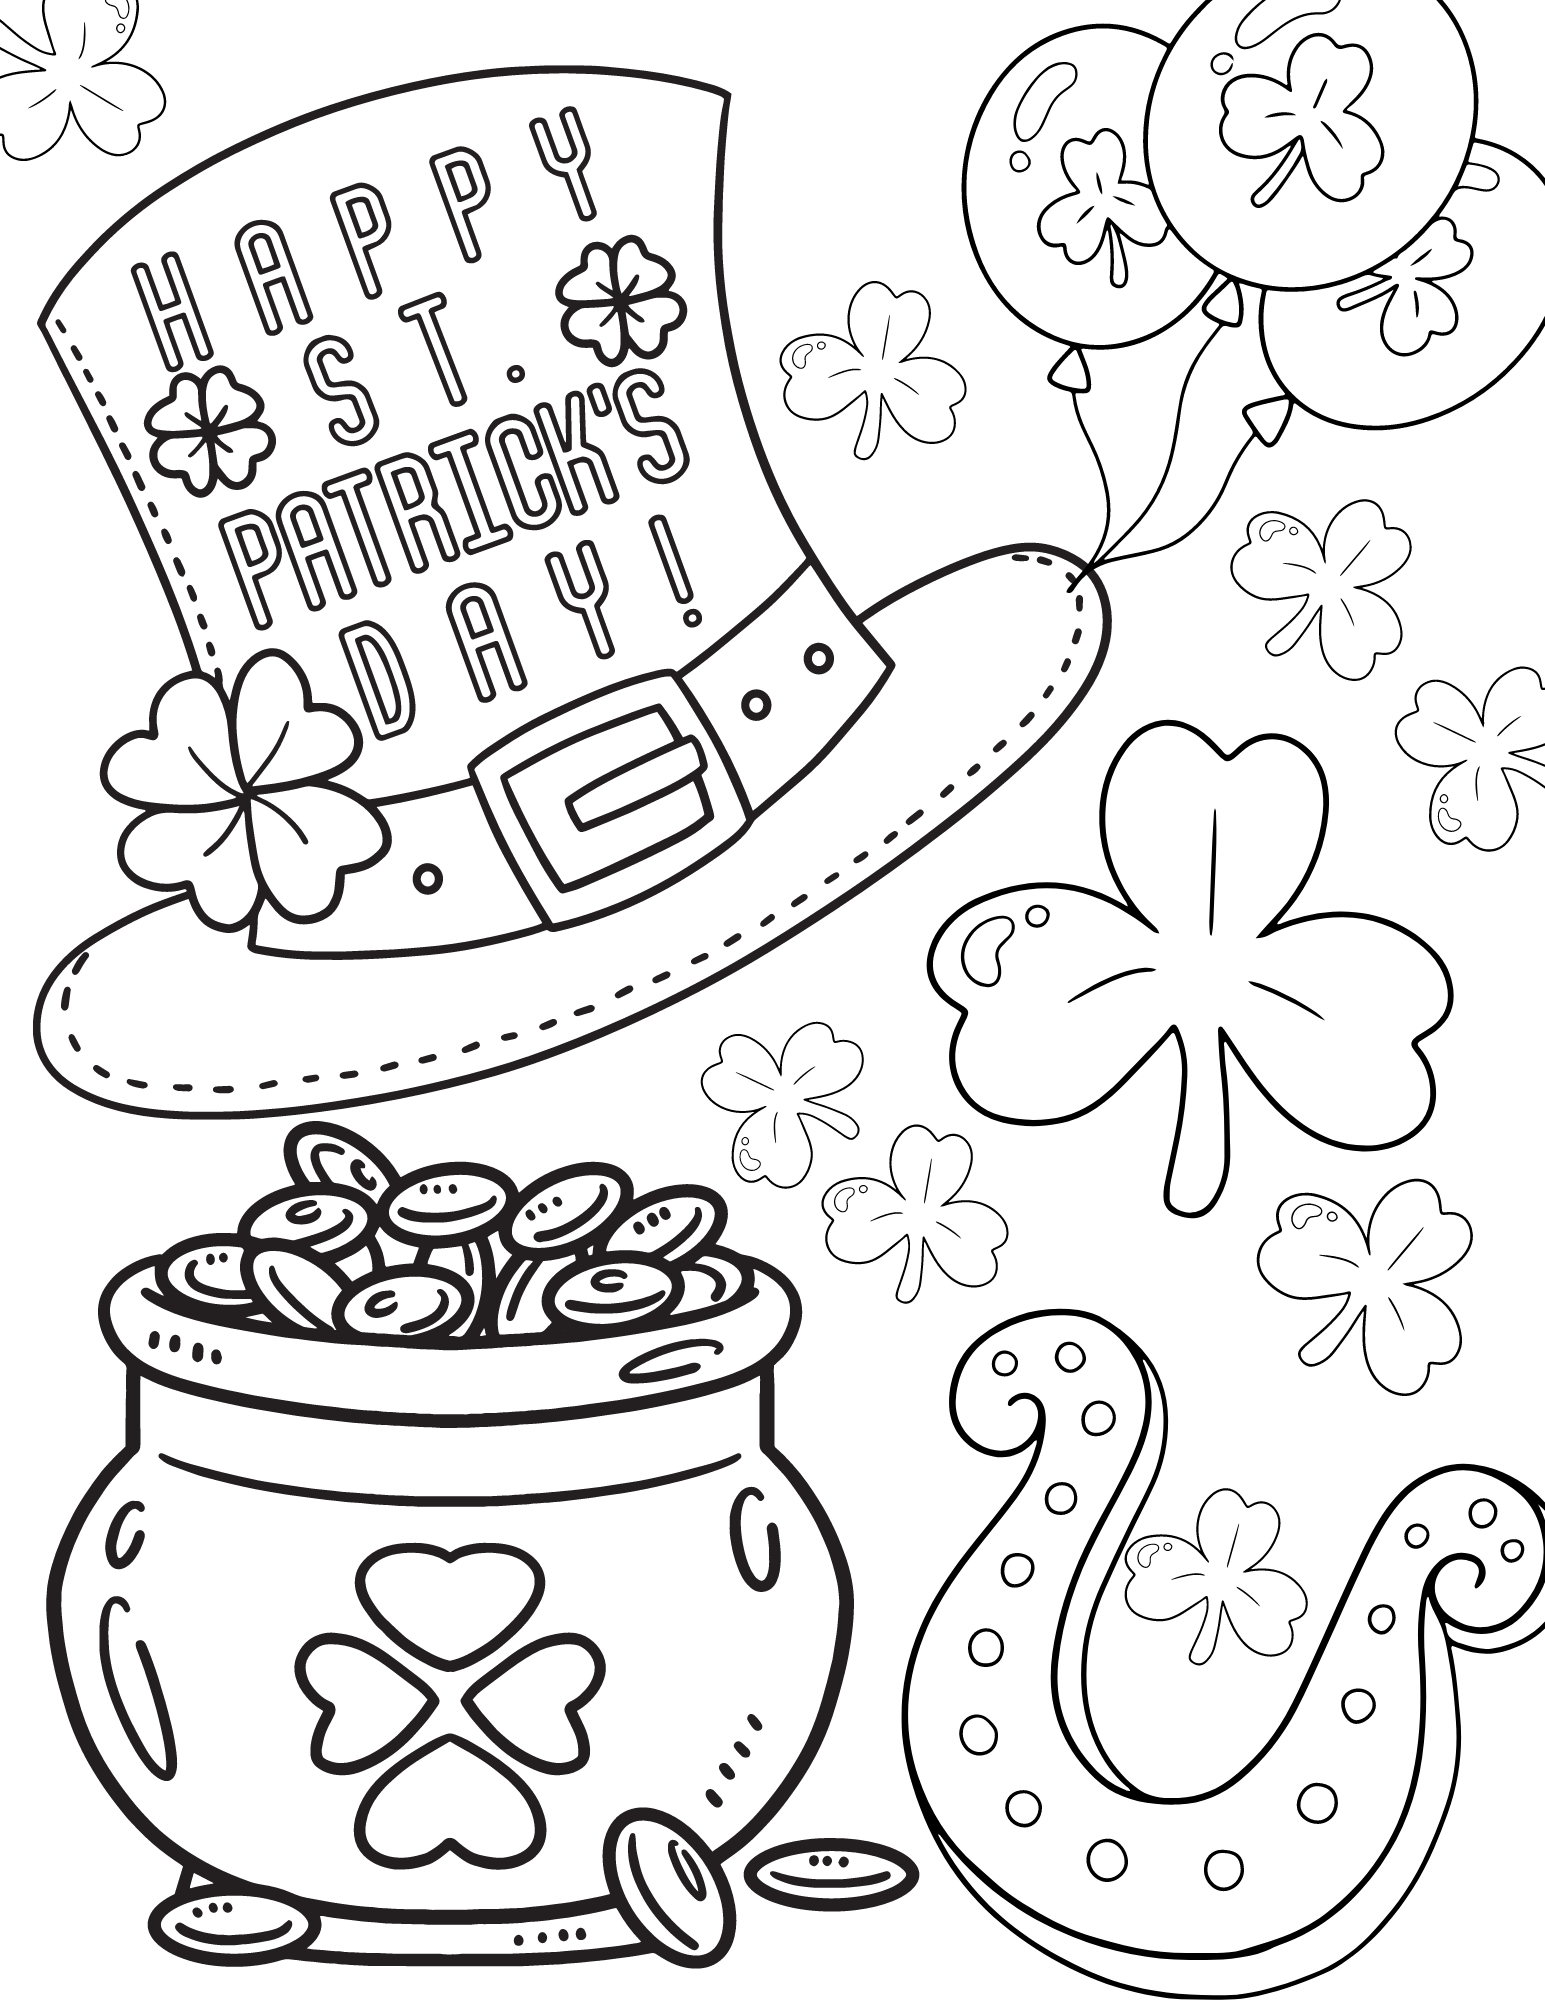 Free Printable St Patrick s Day Coloring Pages AllFreePaperCrafts com